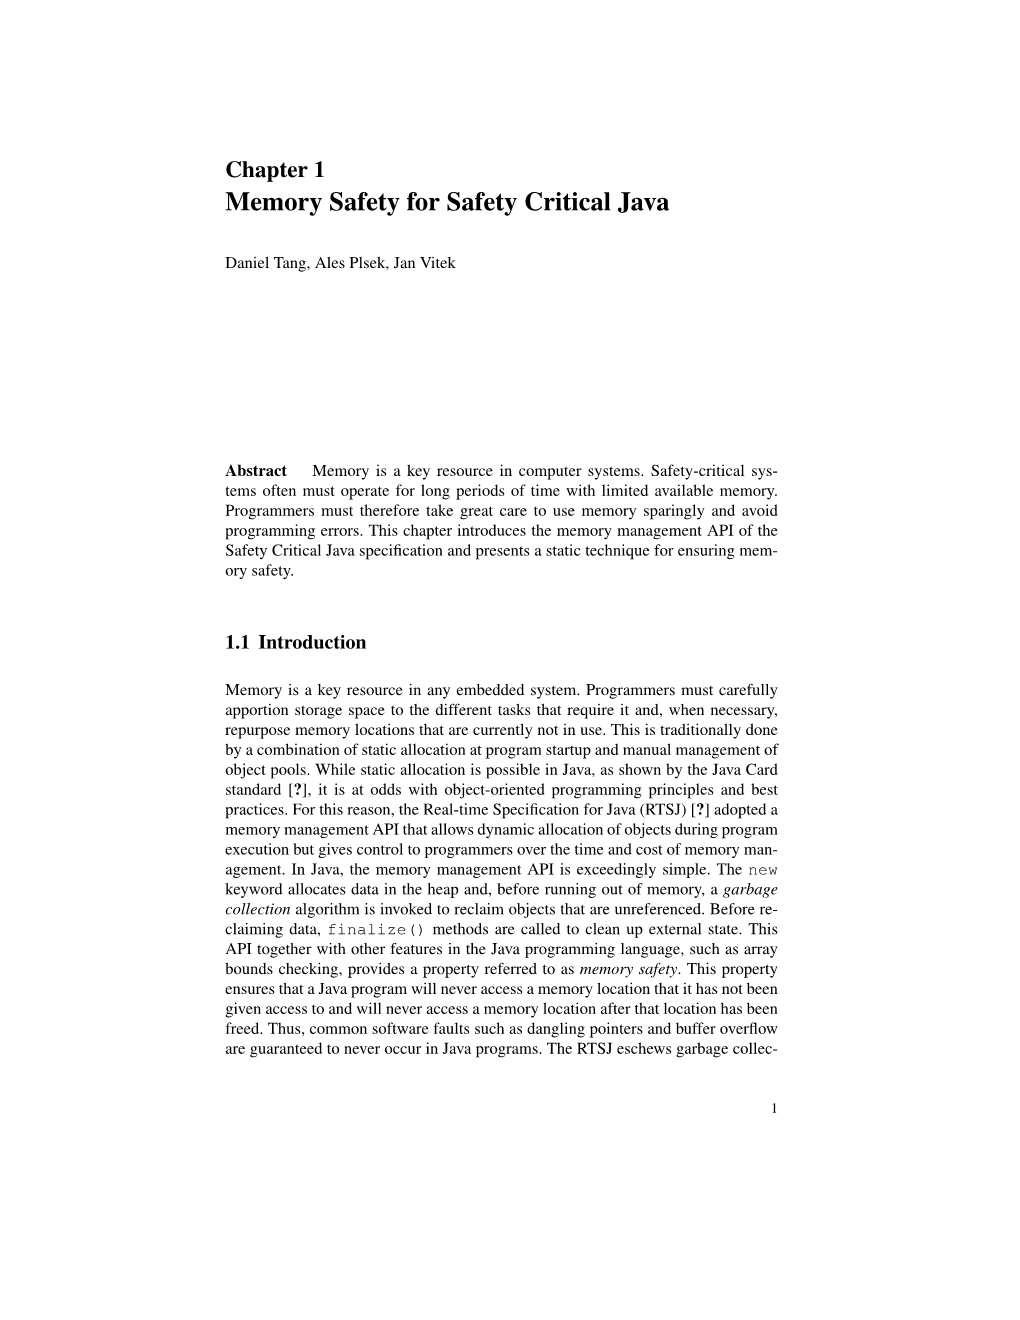 Memory Safety for Safety Critical Java